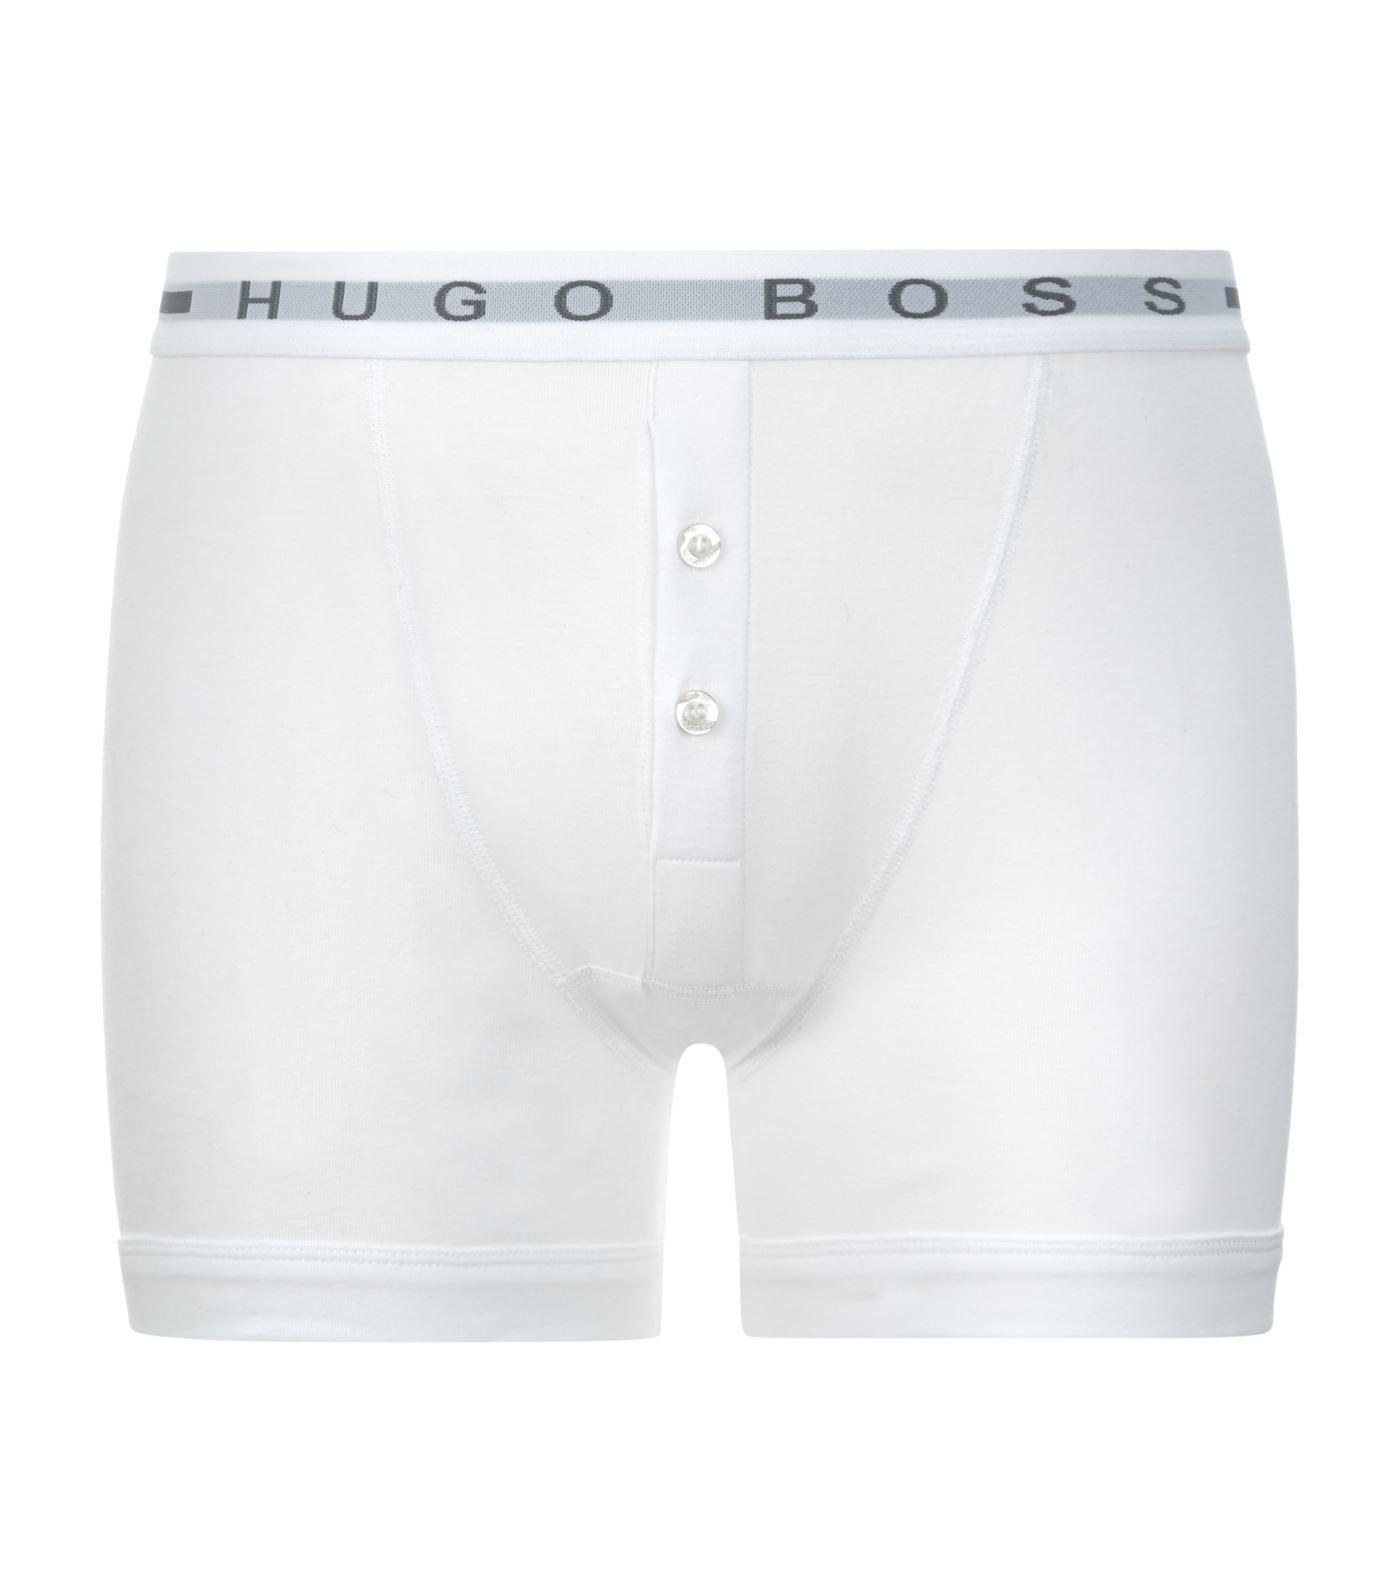 BOSS by HUGO Original Button Fly Shorts in White for Men Lyst